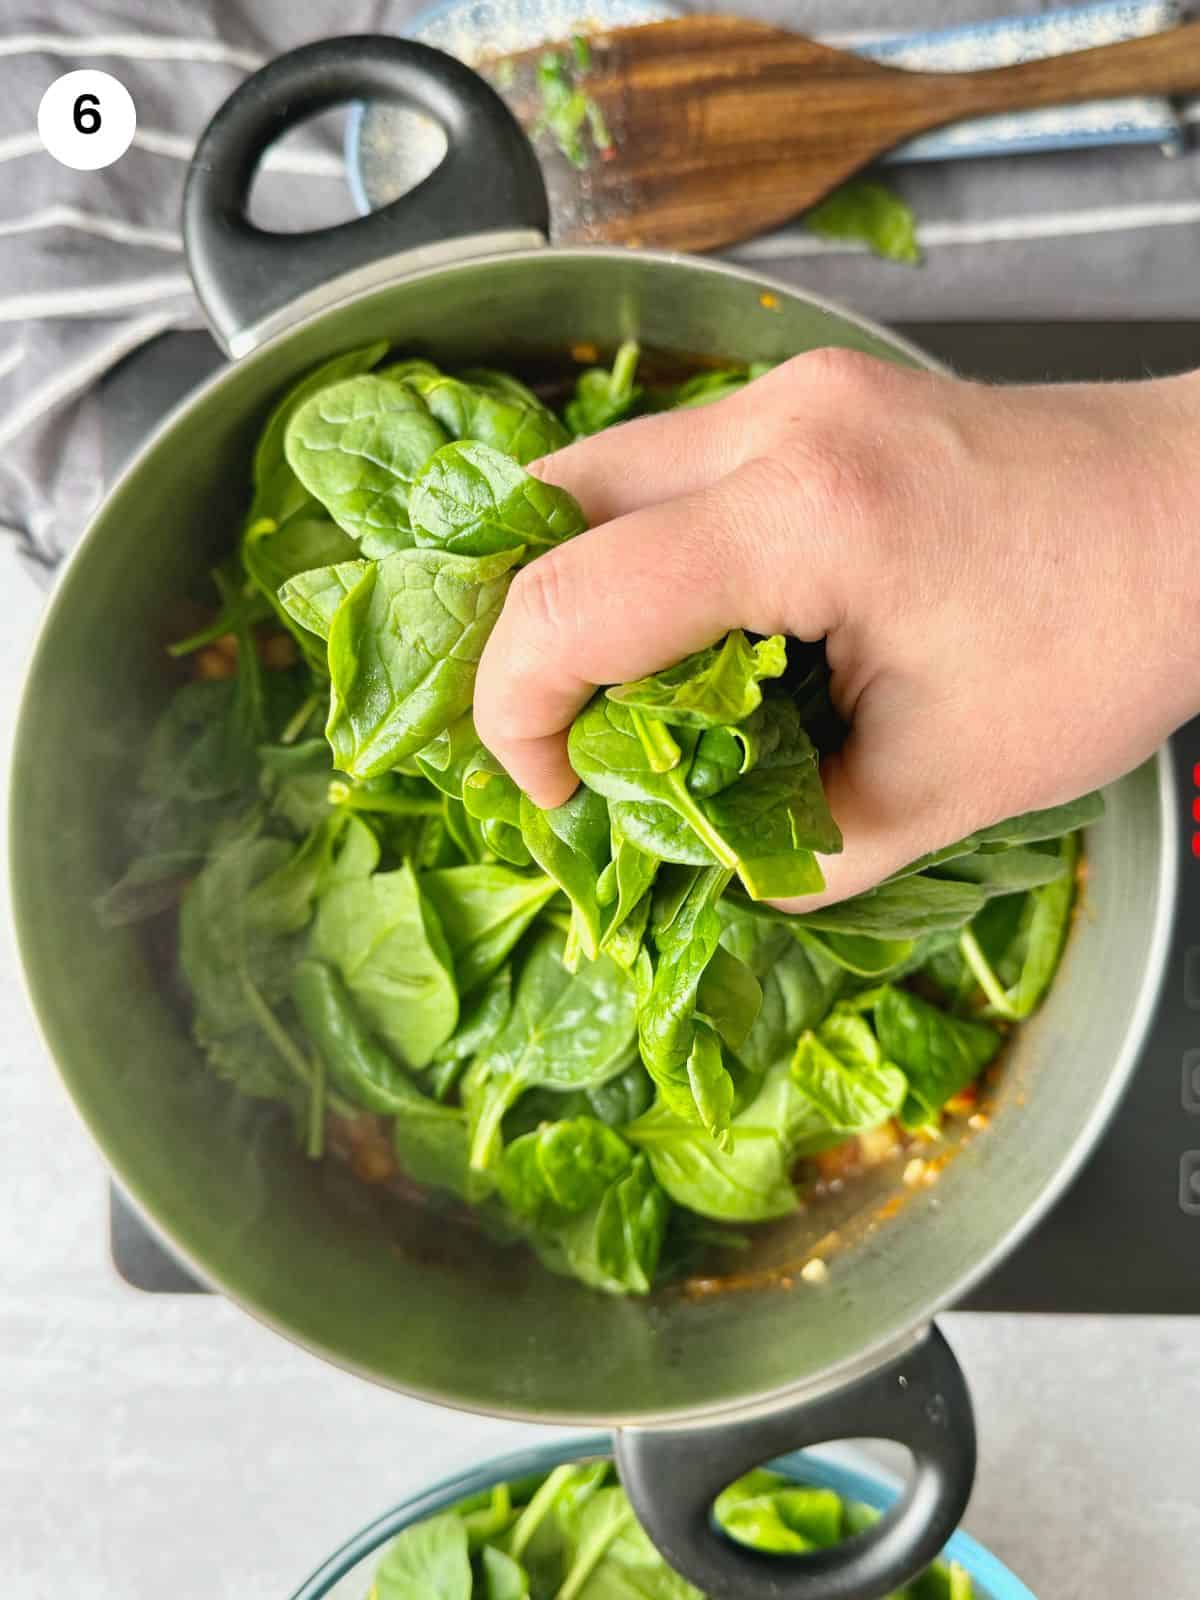 Adding the fresh spinach to the pot.